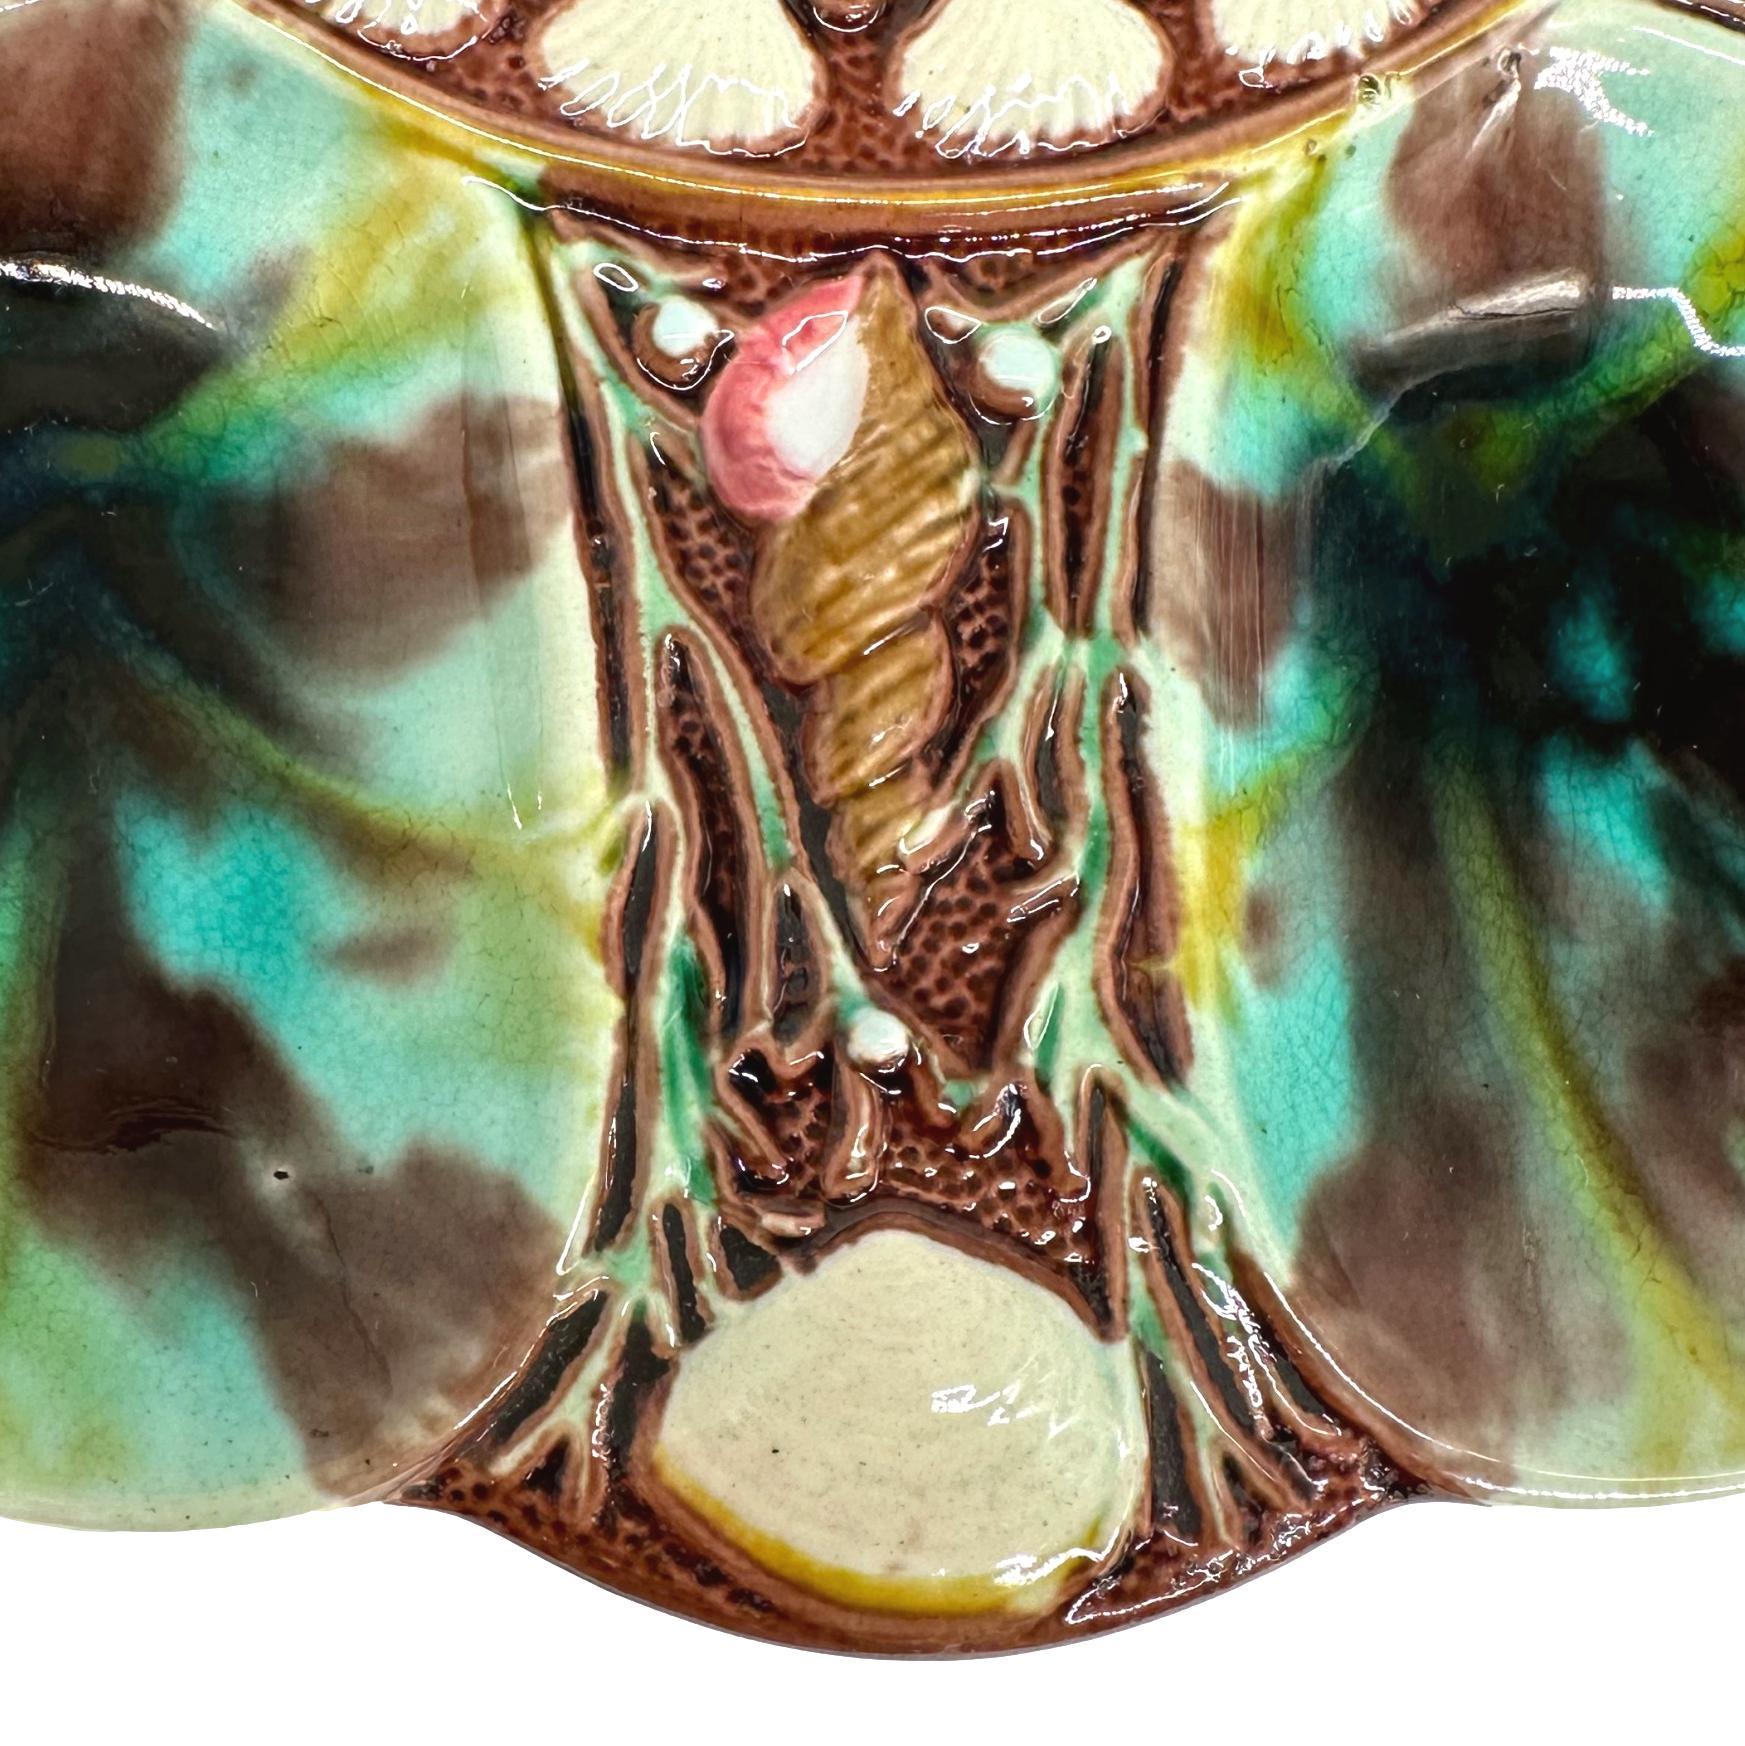 19th Century Minton Majolica Oyster Plate, Mottled Leopard Spots, English, Dated 1870 For Sale